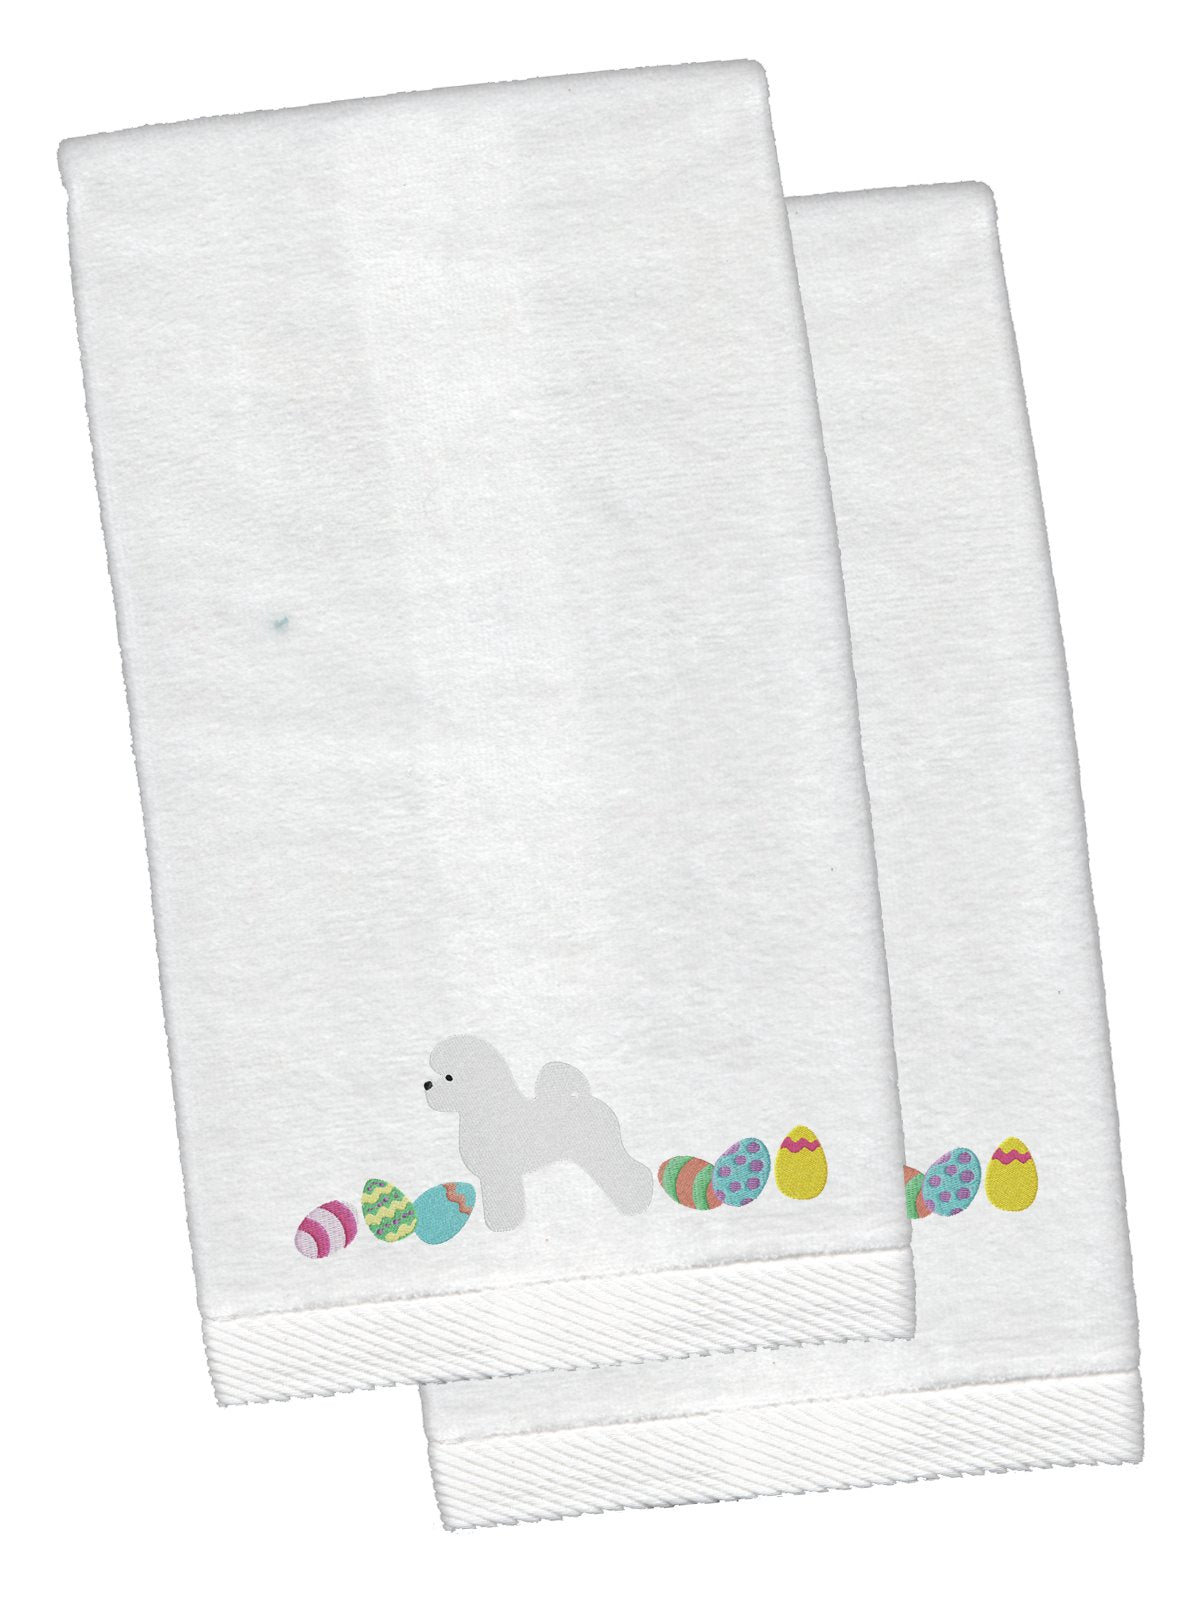 Bichon Frise Easter White Embroidered Plush Hand Towel Set of 2 CK1609KTEMB by Caroline's Treasures